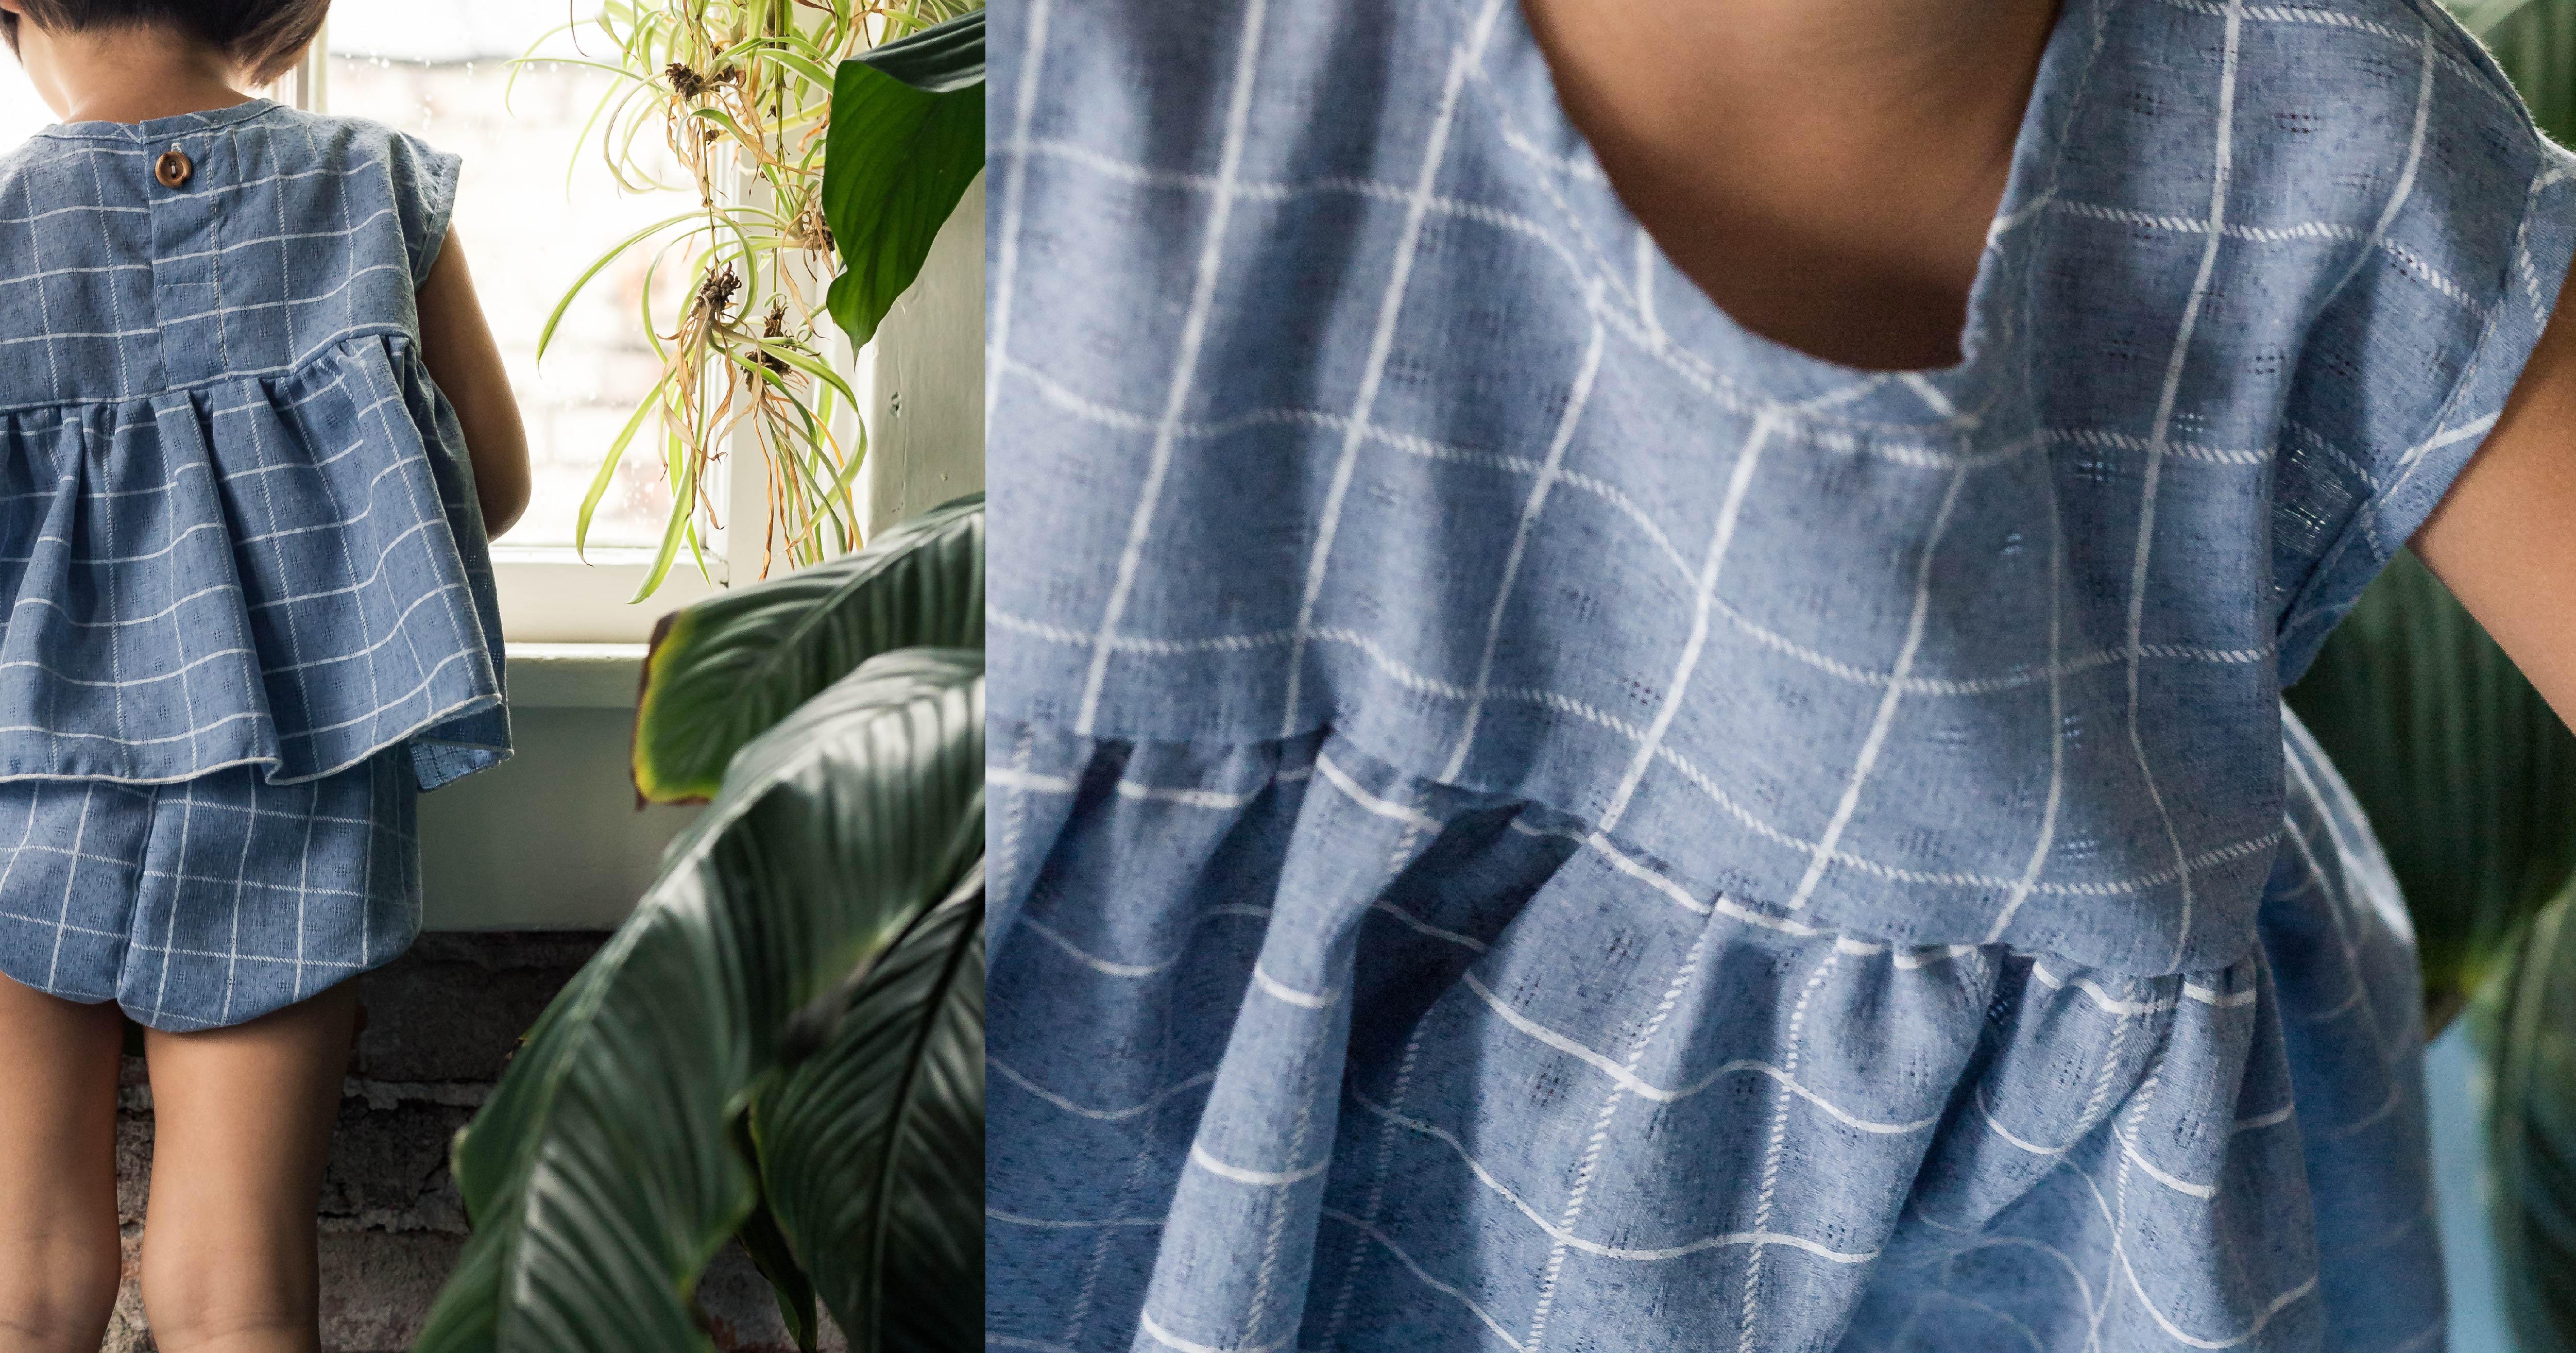 summer capsule 02 - ethical kids clothing